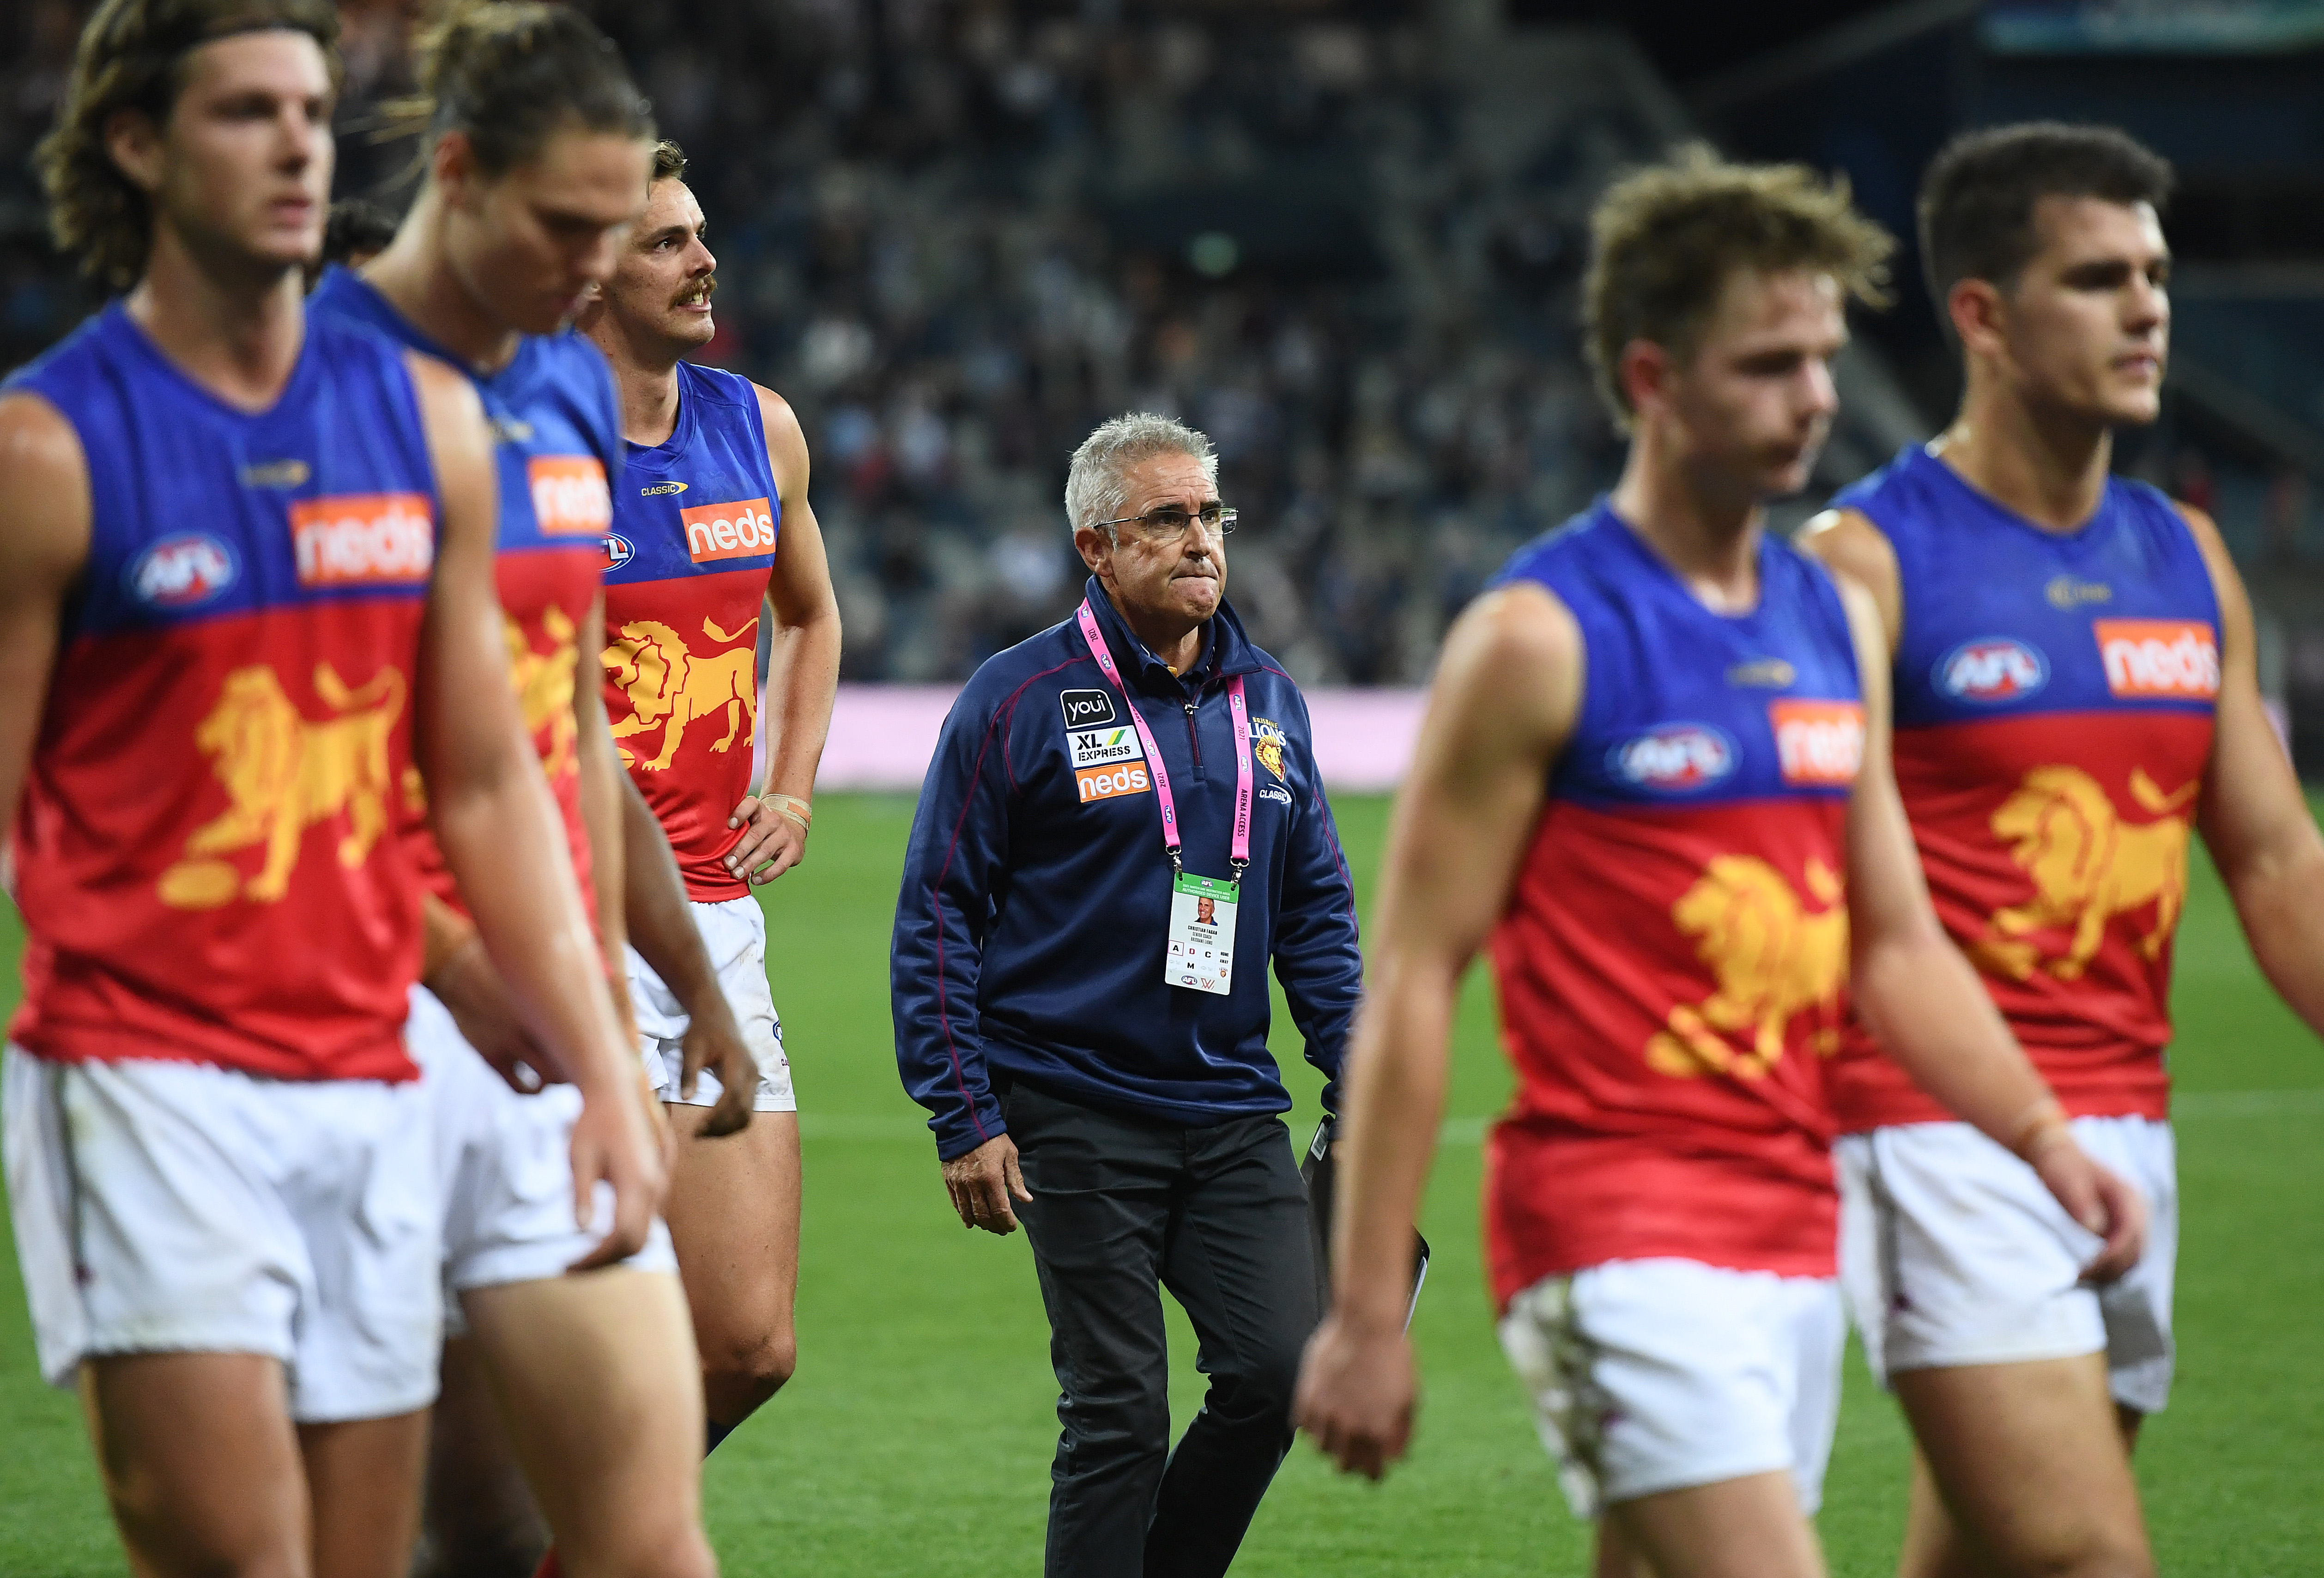 Chris Fagan the coach of the Lions and his team mates look dejected as they walk off the field after losing the round 2 AFL match between the Geelong Cats and the Brisbane Lions at GMHBA Stadium on March 26, 2021 in Geelong, Australia.